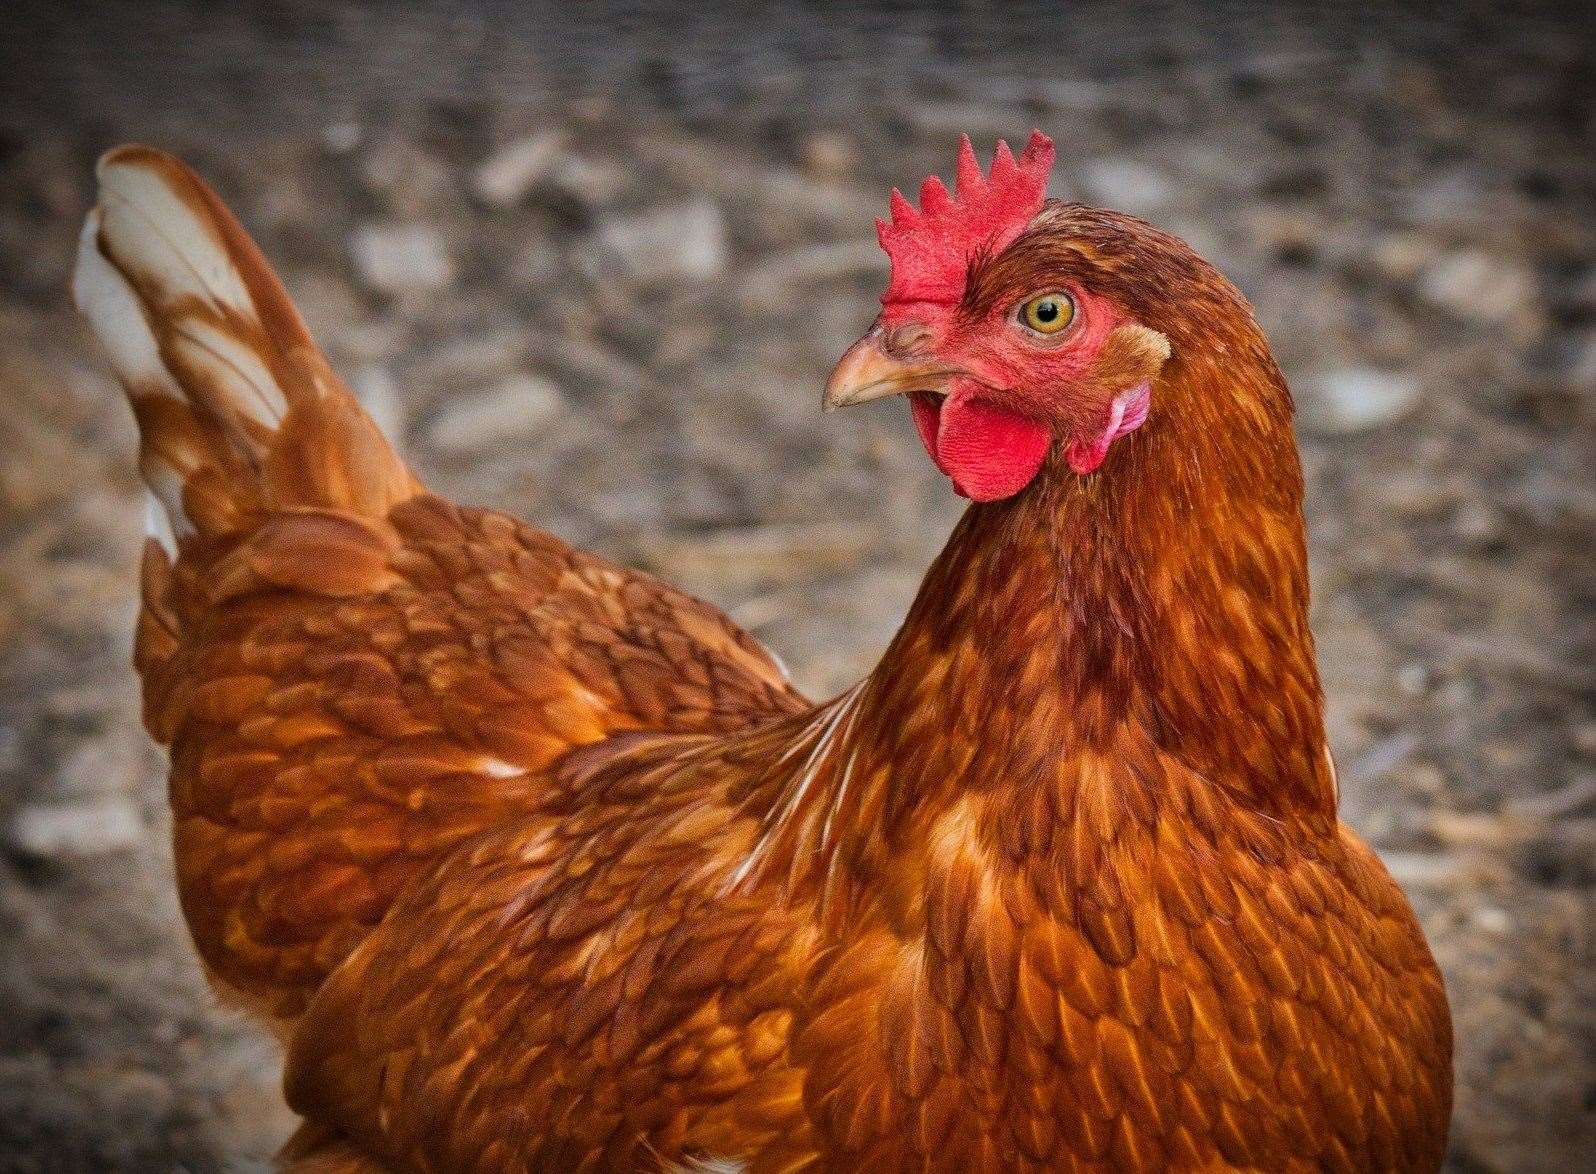 Aldi disputes the claims made against its chickens and says all of its stores comply with animal welfare standards Photo: Stock